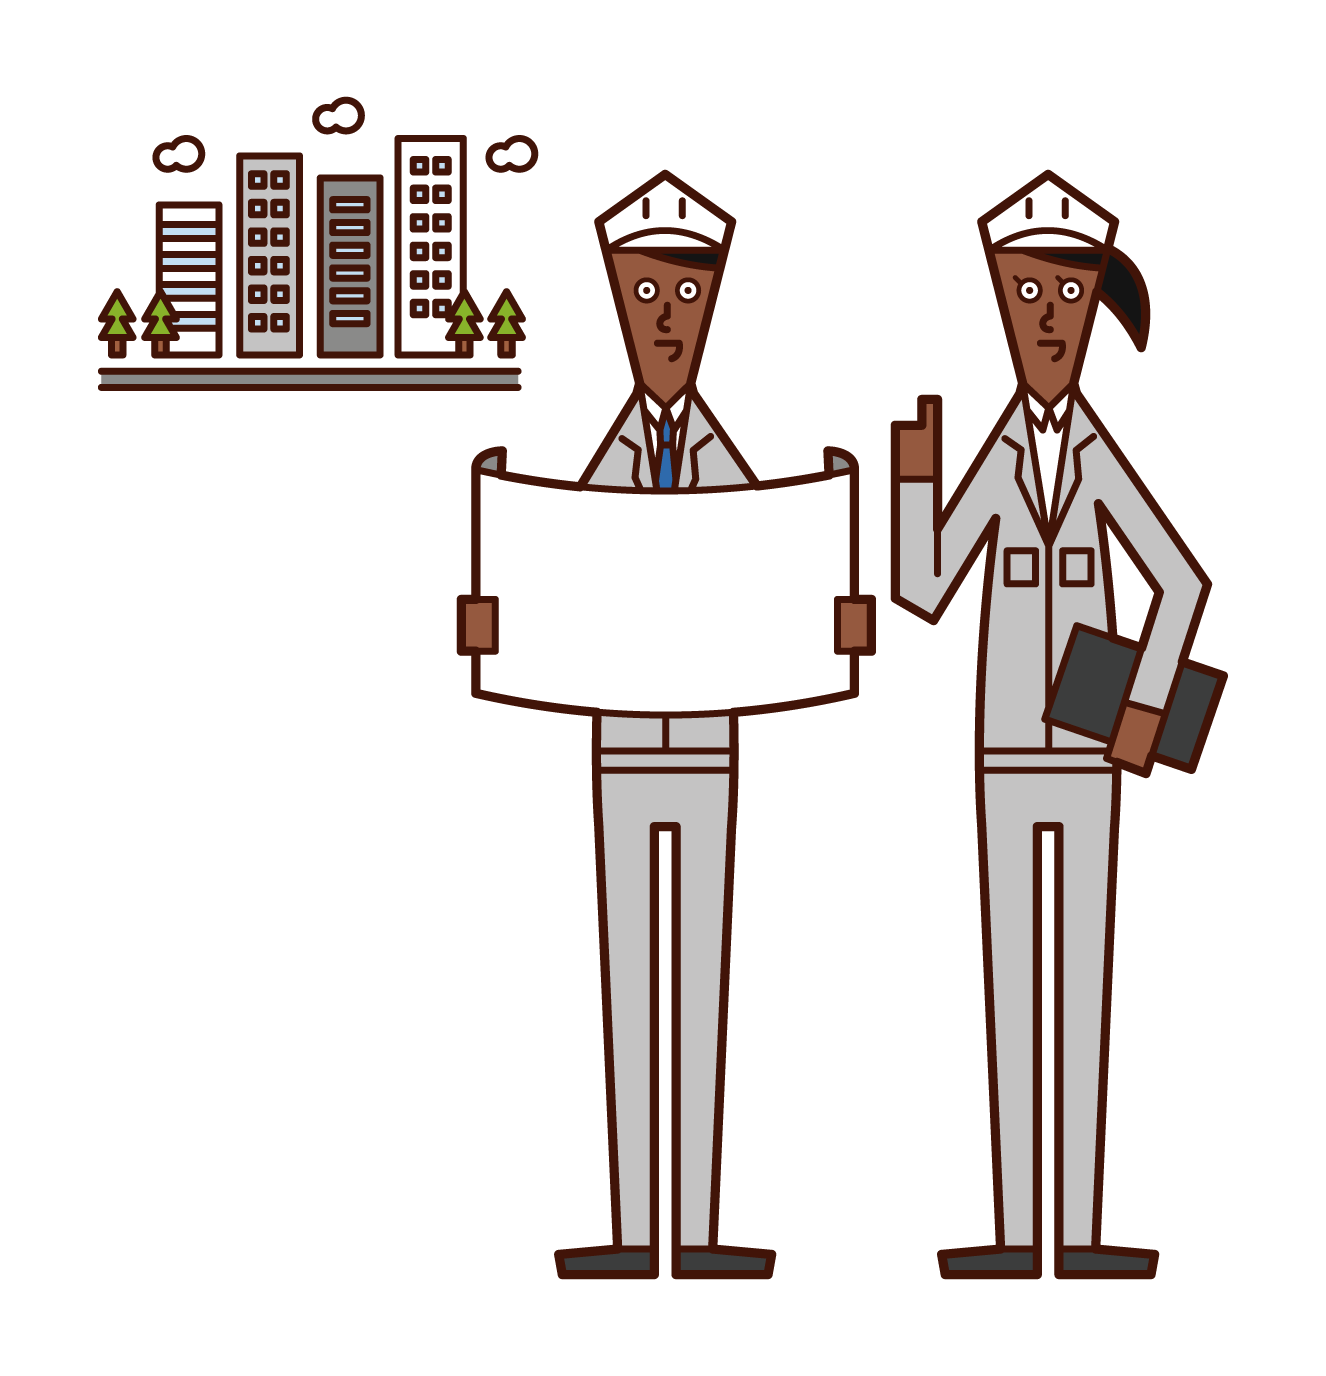 Illustration of a person developing an urban area